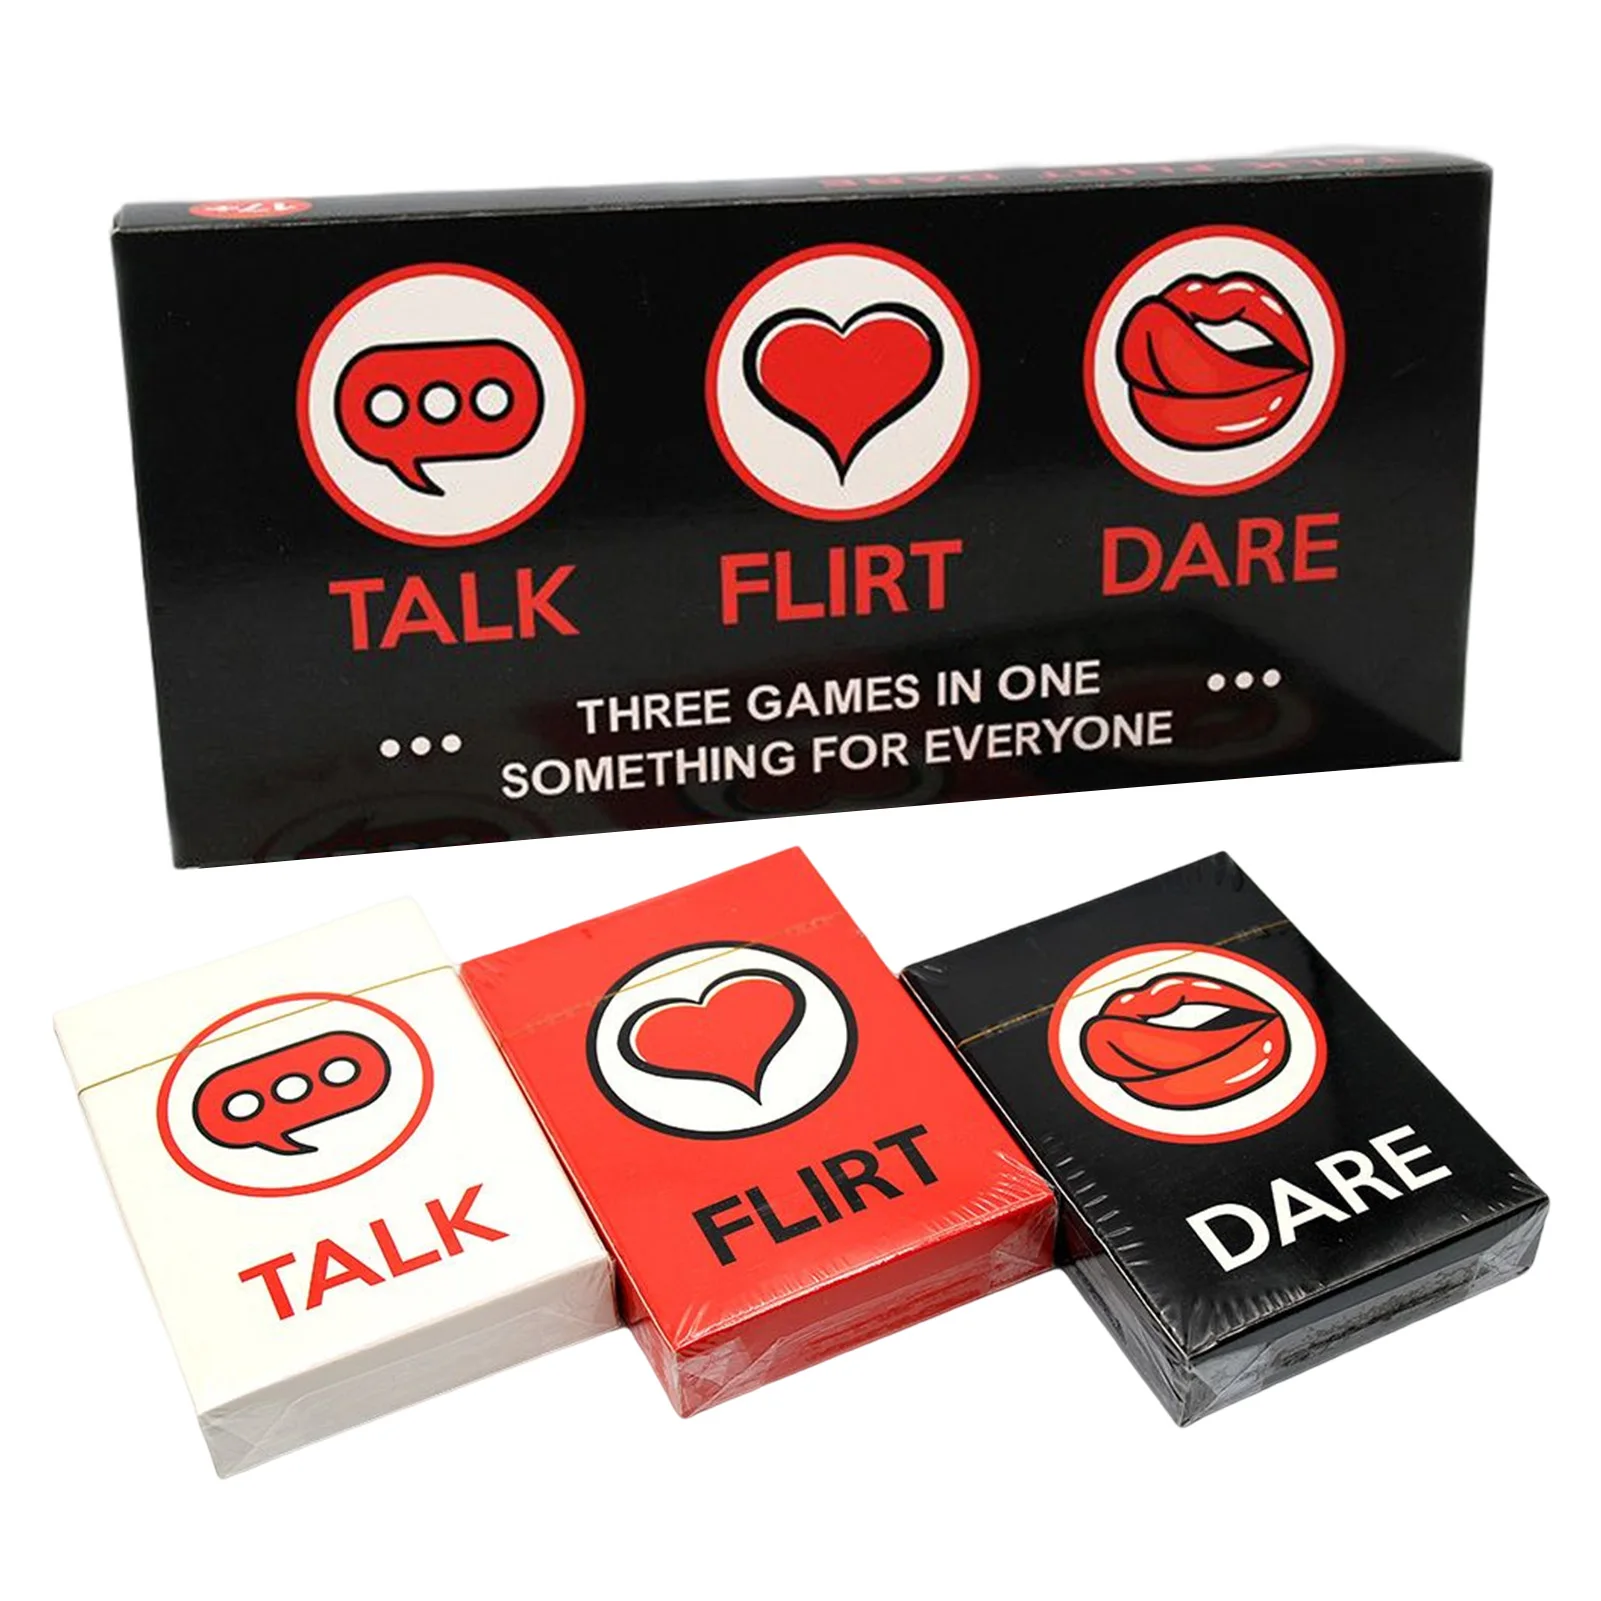 

Fun Couple Romantic Card Game Game Deck Talk Or Flirt Or Dare Cards 3 Games Cards 3 Games In 1 Couple Cards Valentine's Day Gift